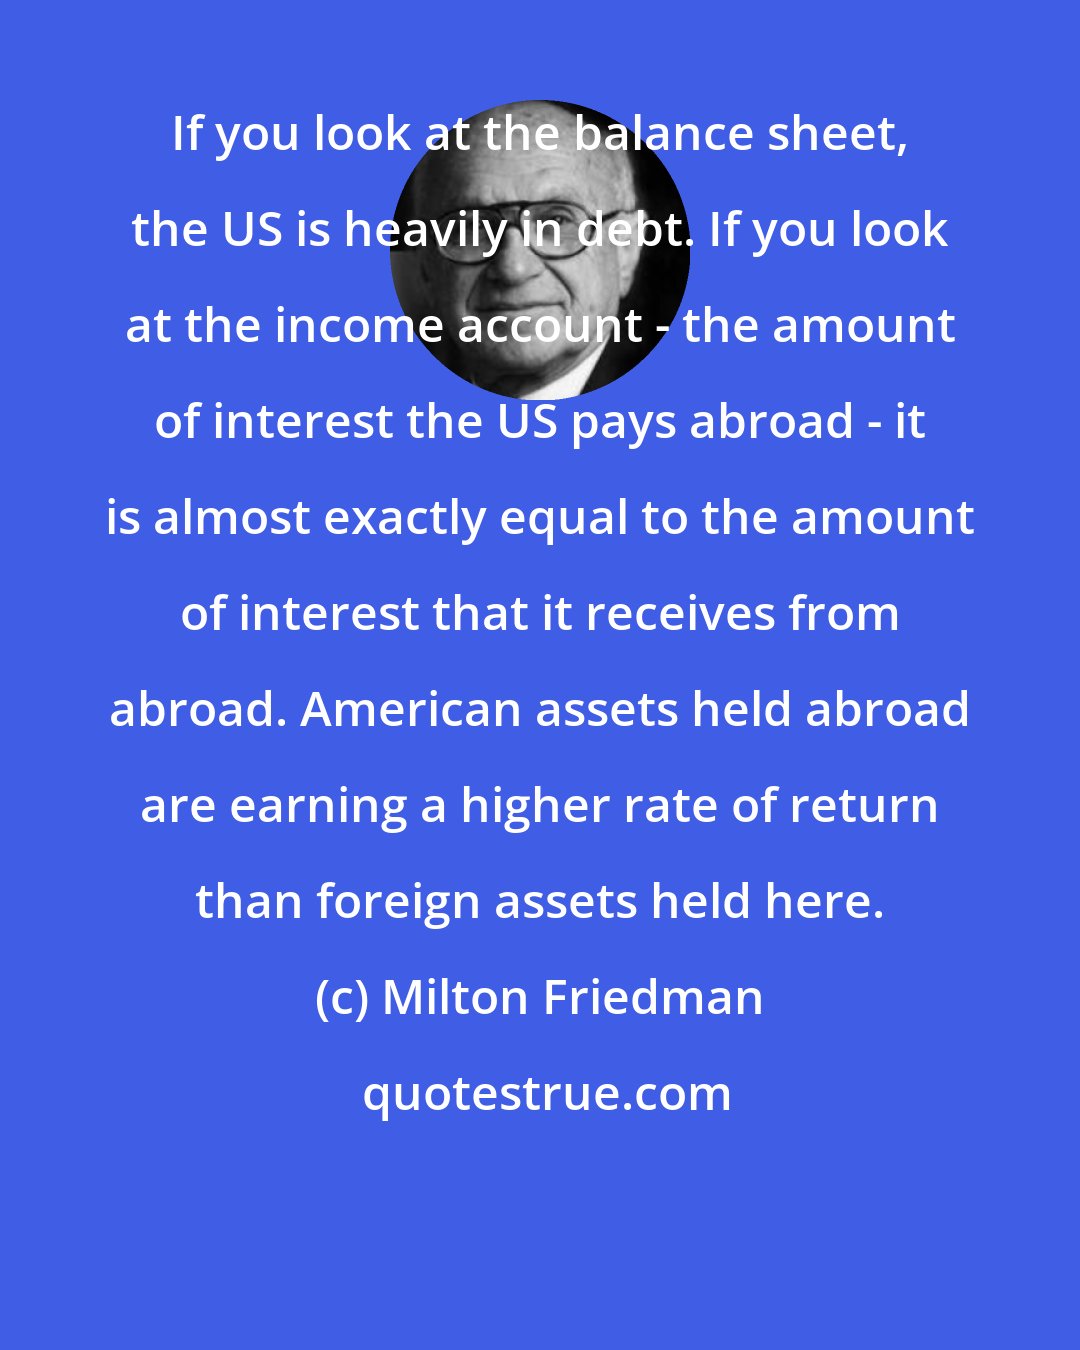 Milton Friedman: If you look at the balance sheet, the US is heavily in debt. If you look at the income account - the amount of interest the US pays abroad - it is almost exactly equal to the amount of interest that it receives from abroad. American assets held abroad are earning a higher rate of return than foreign assets held here.